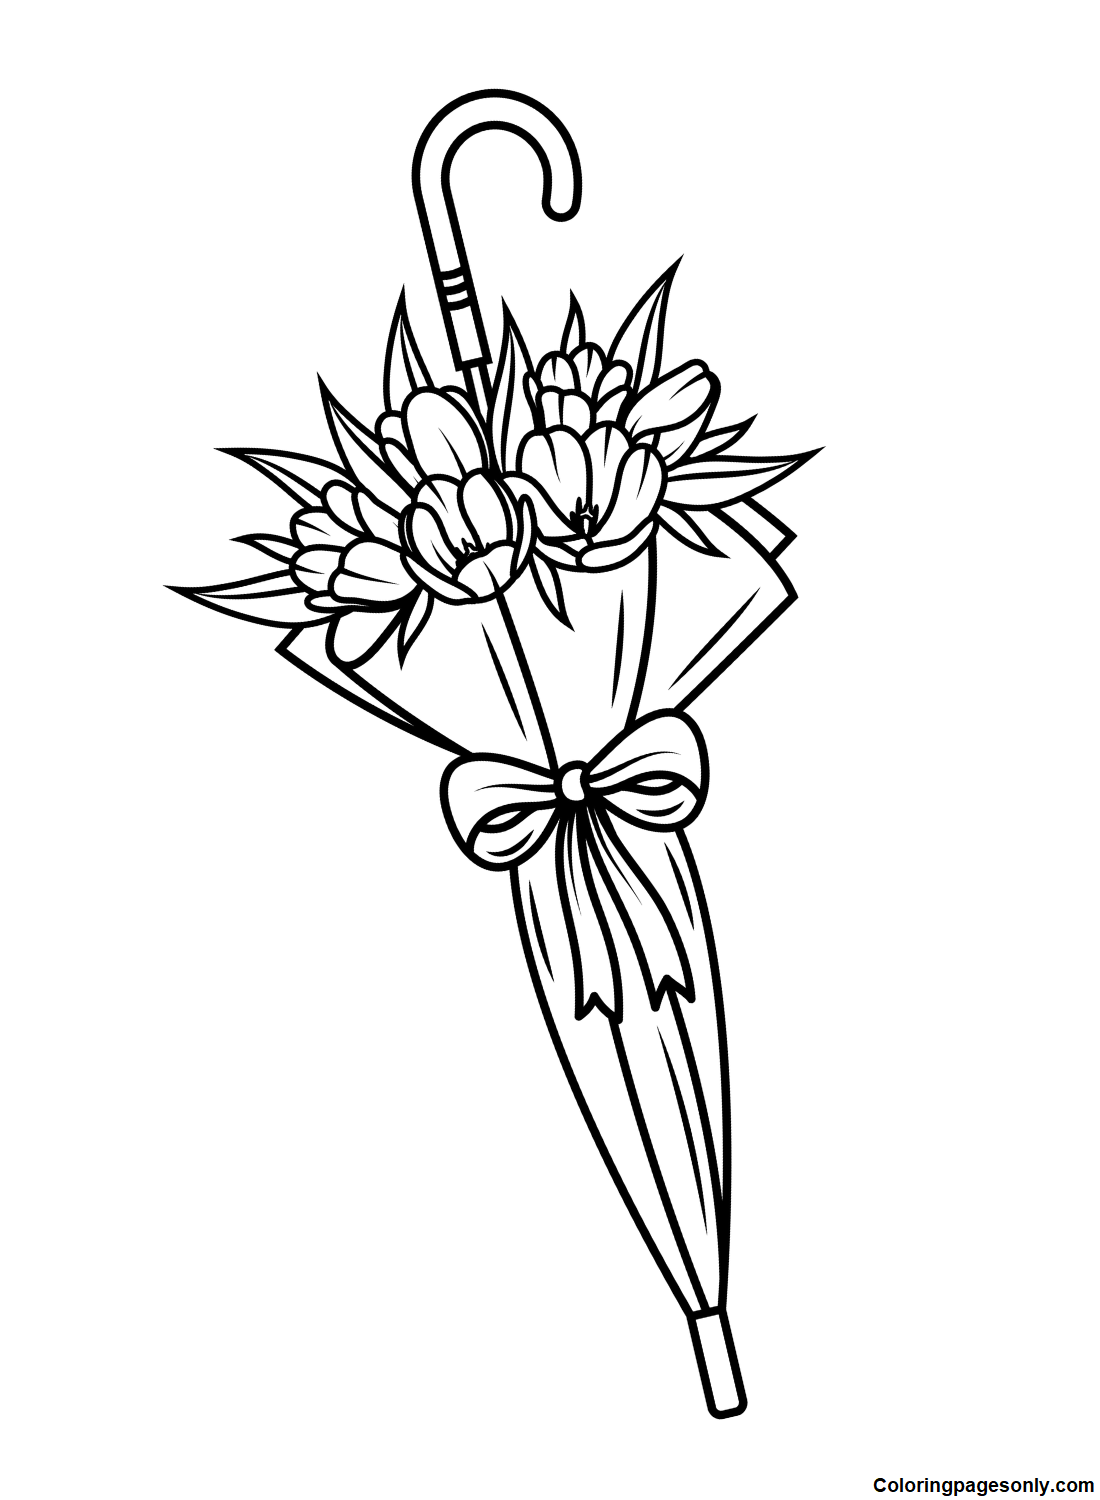 Flowers Umbrella with Bow Coloring Page